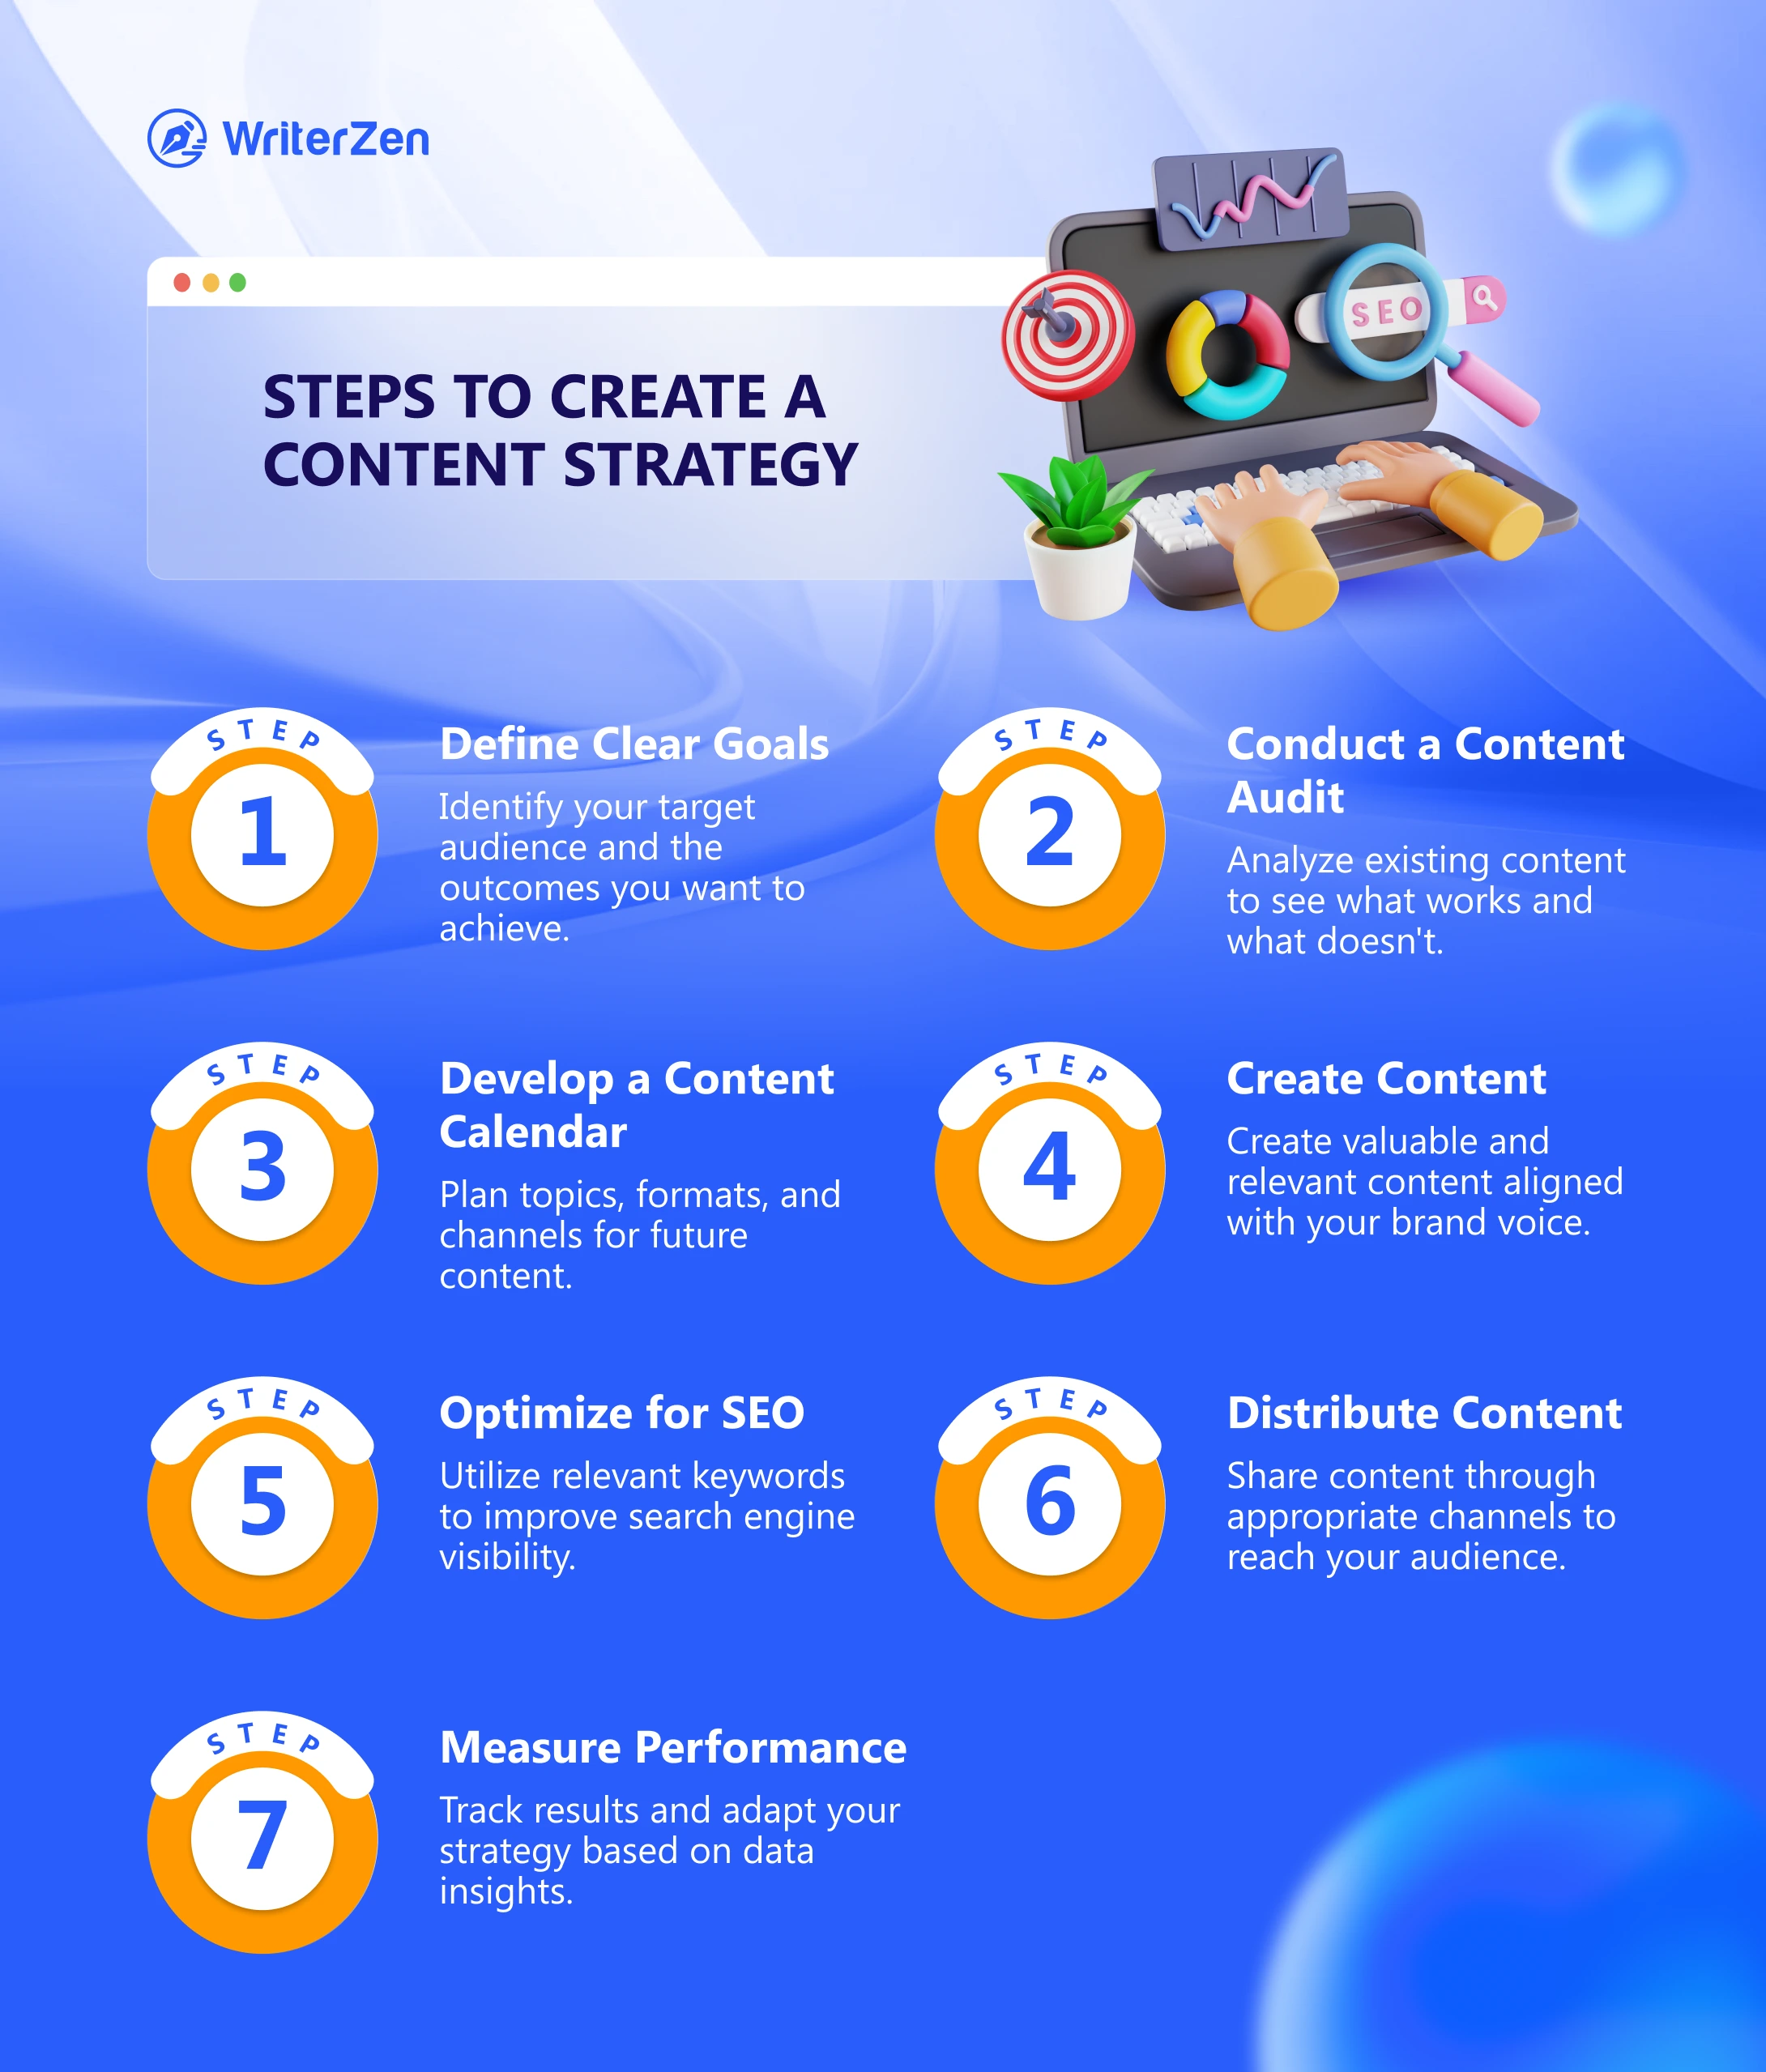 Steps to create a content strategy